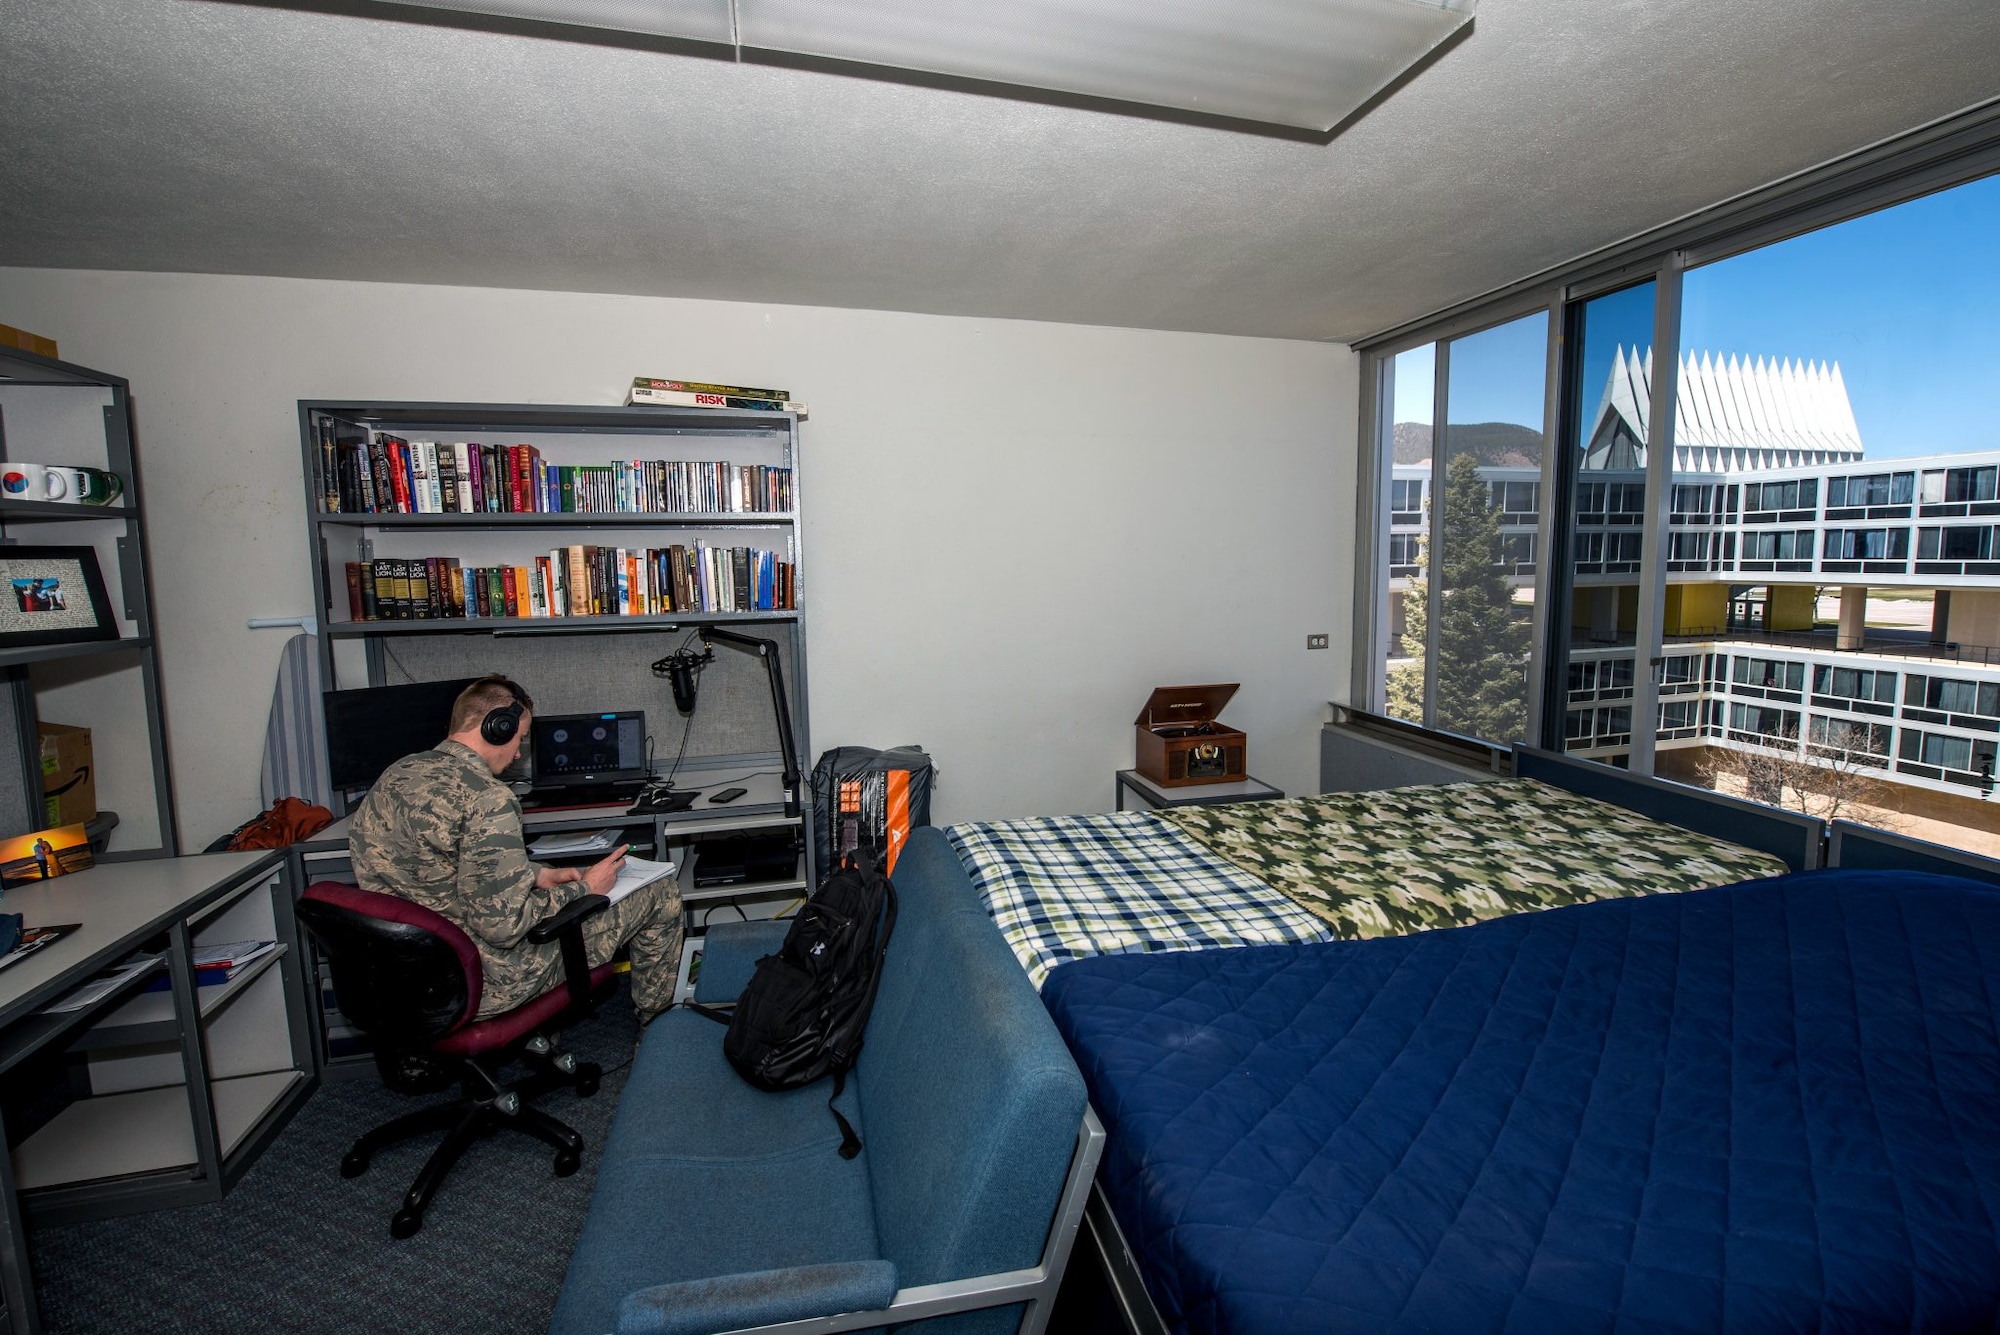 Walker Ince, a senior cadet, attends a class remotely on April 6, 2020 from his dorm room in Sijan Hall at the U.S. Air Force Academy. Due to Covid-19, freshman through junior year cadets were sent home to learn remotely while the senior class remained.